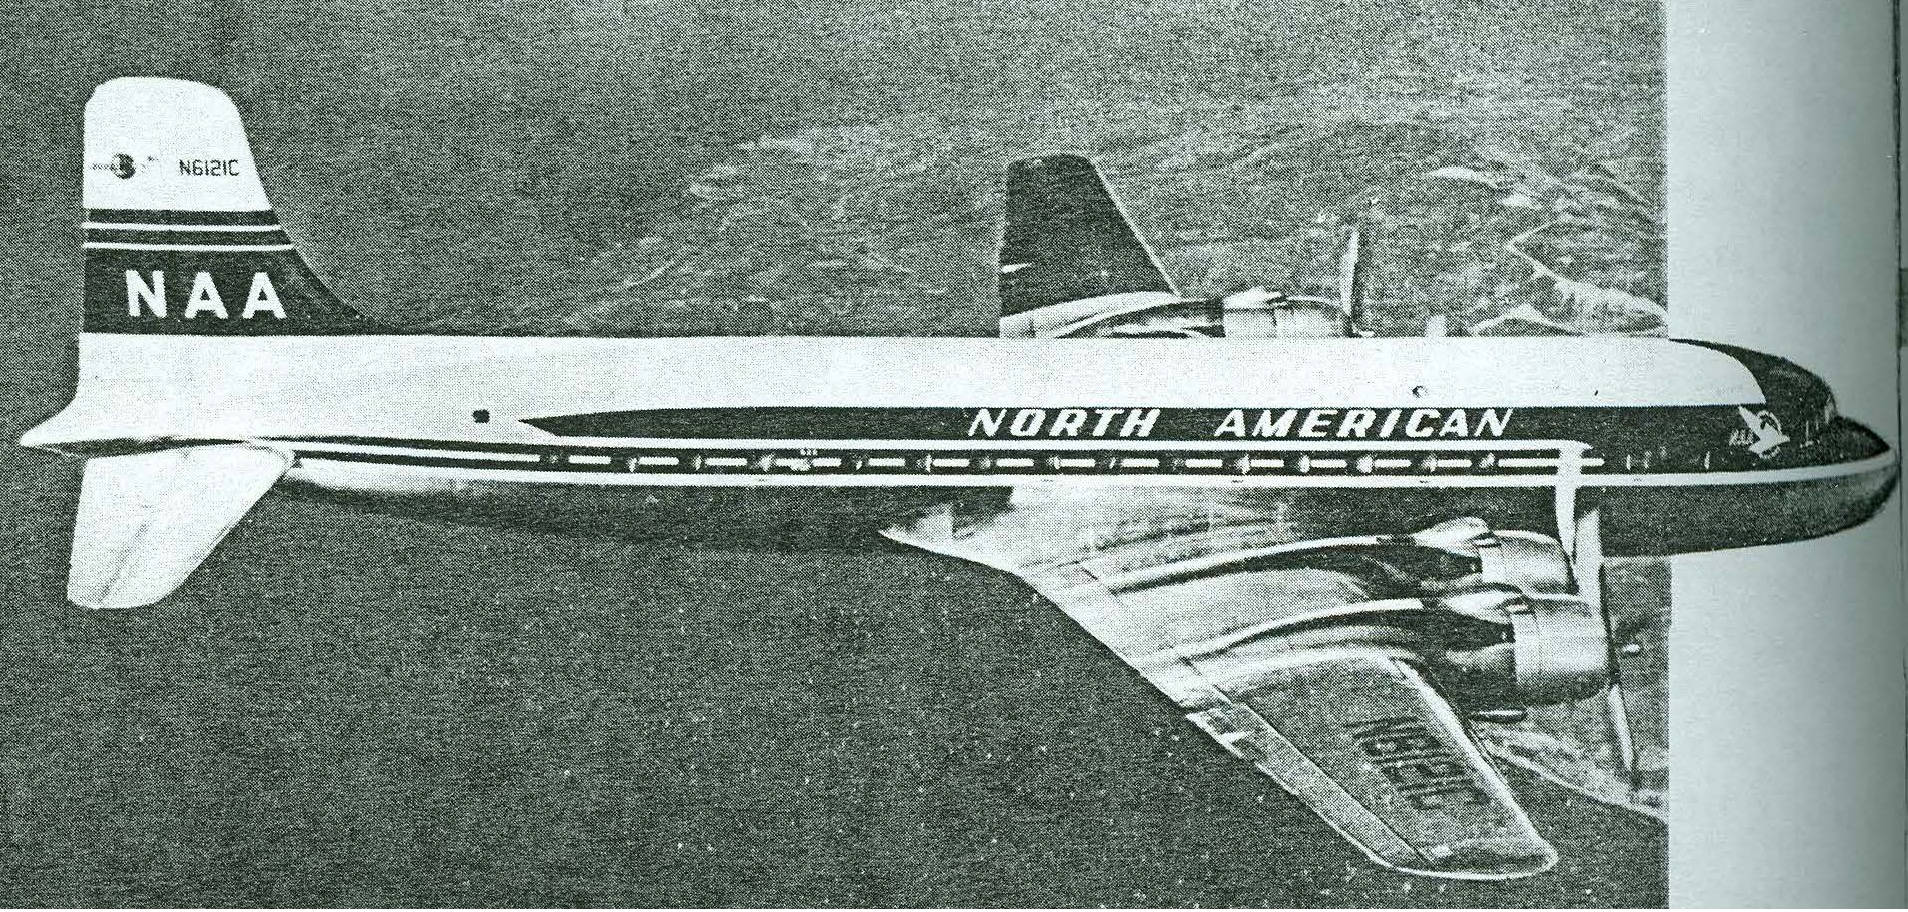 North American Airlines